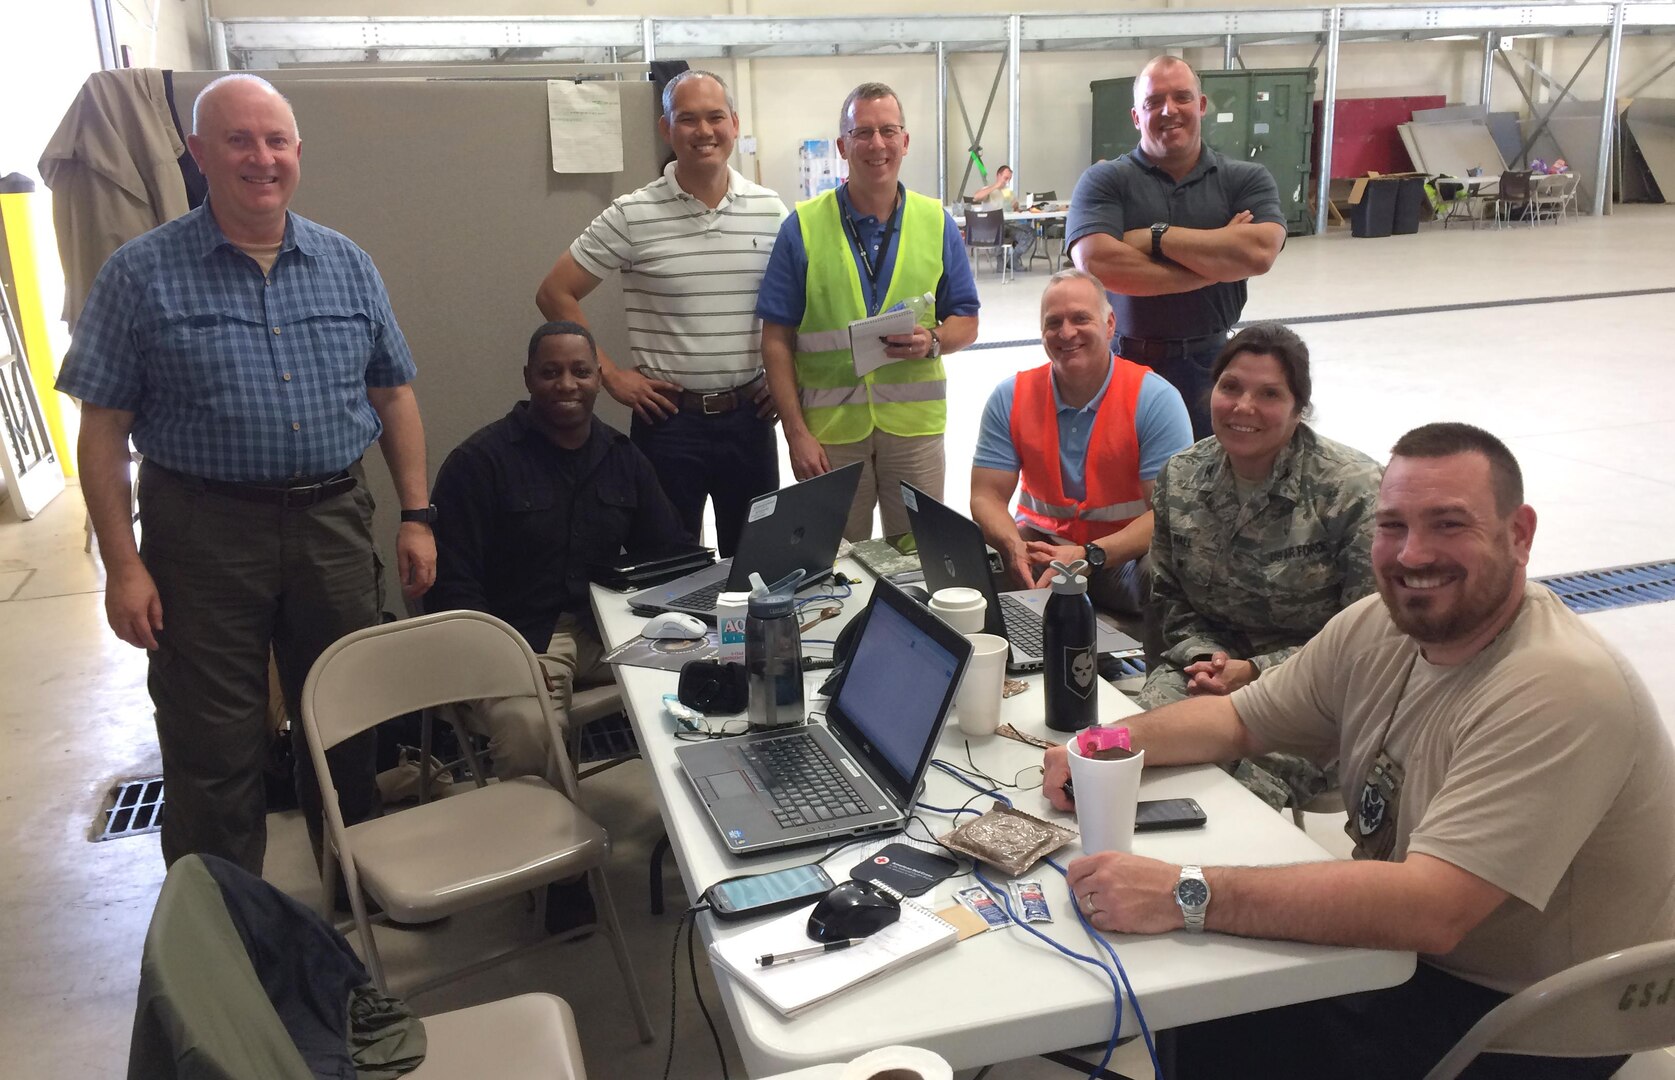 Andre Hinson, seated to the left, and other members of the Defense Logistics Agency Assessment Team take part in Joint Task Force Port Opening’s exercise Turbo Distribution 16-1 at Camp Shelby, Hattiesburg, Mississippi, Oct. 29.